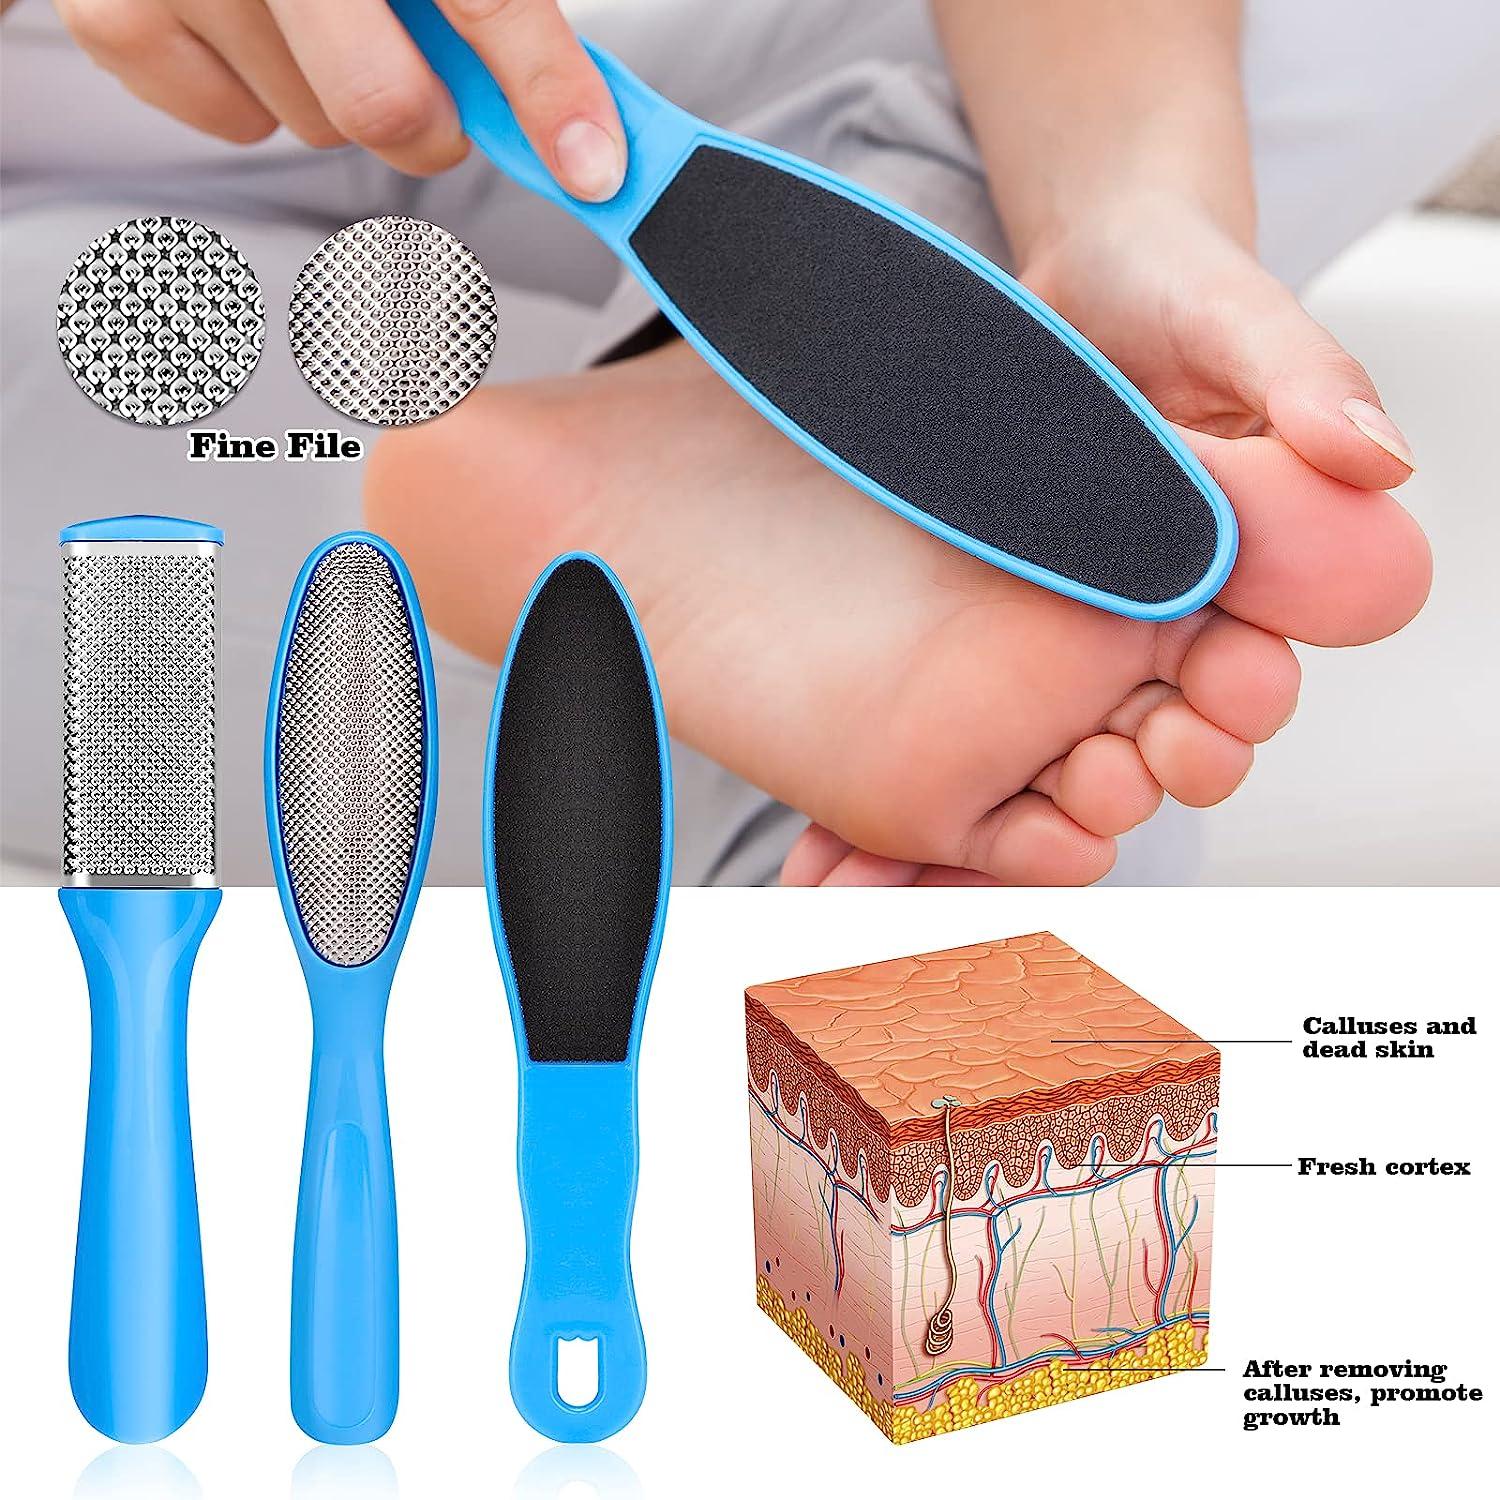 Pedicure Kits - Callus Remover for Feet, 23 in 1 Professional Manicure Set Pedicure  Tools Stainless Steel Foot Care, Foot File Foot Rasp Dead Skin for Women  Men Home Foot Spa Kit, Blue23